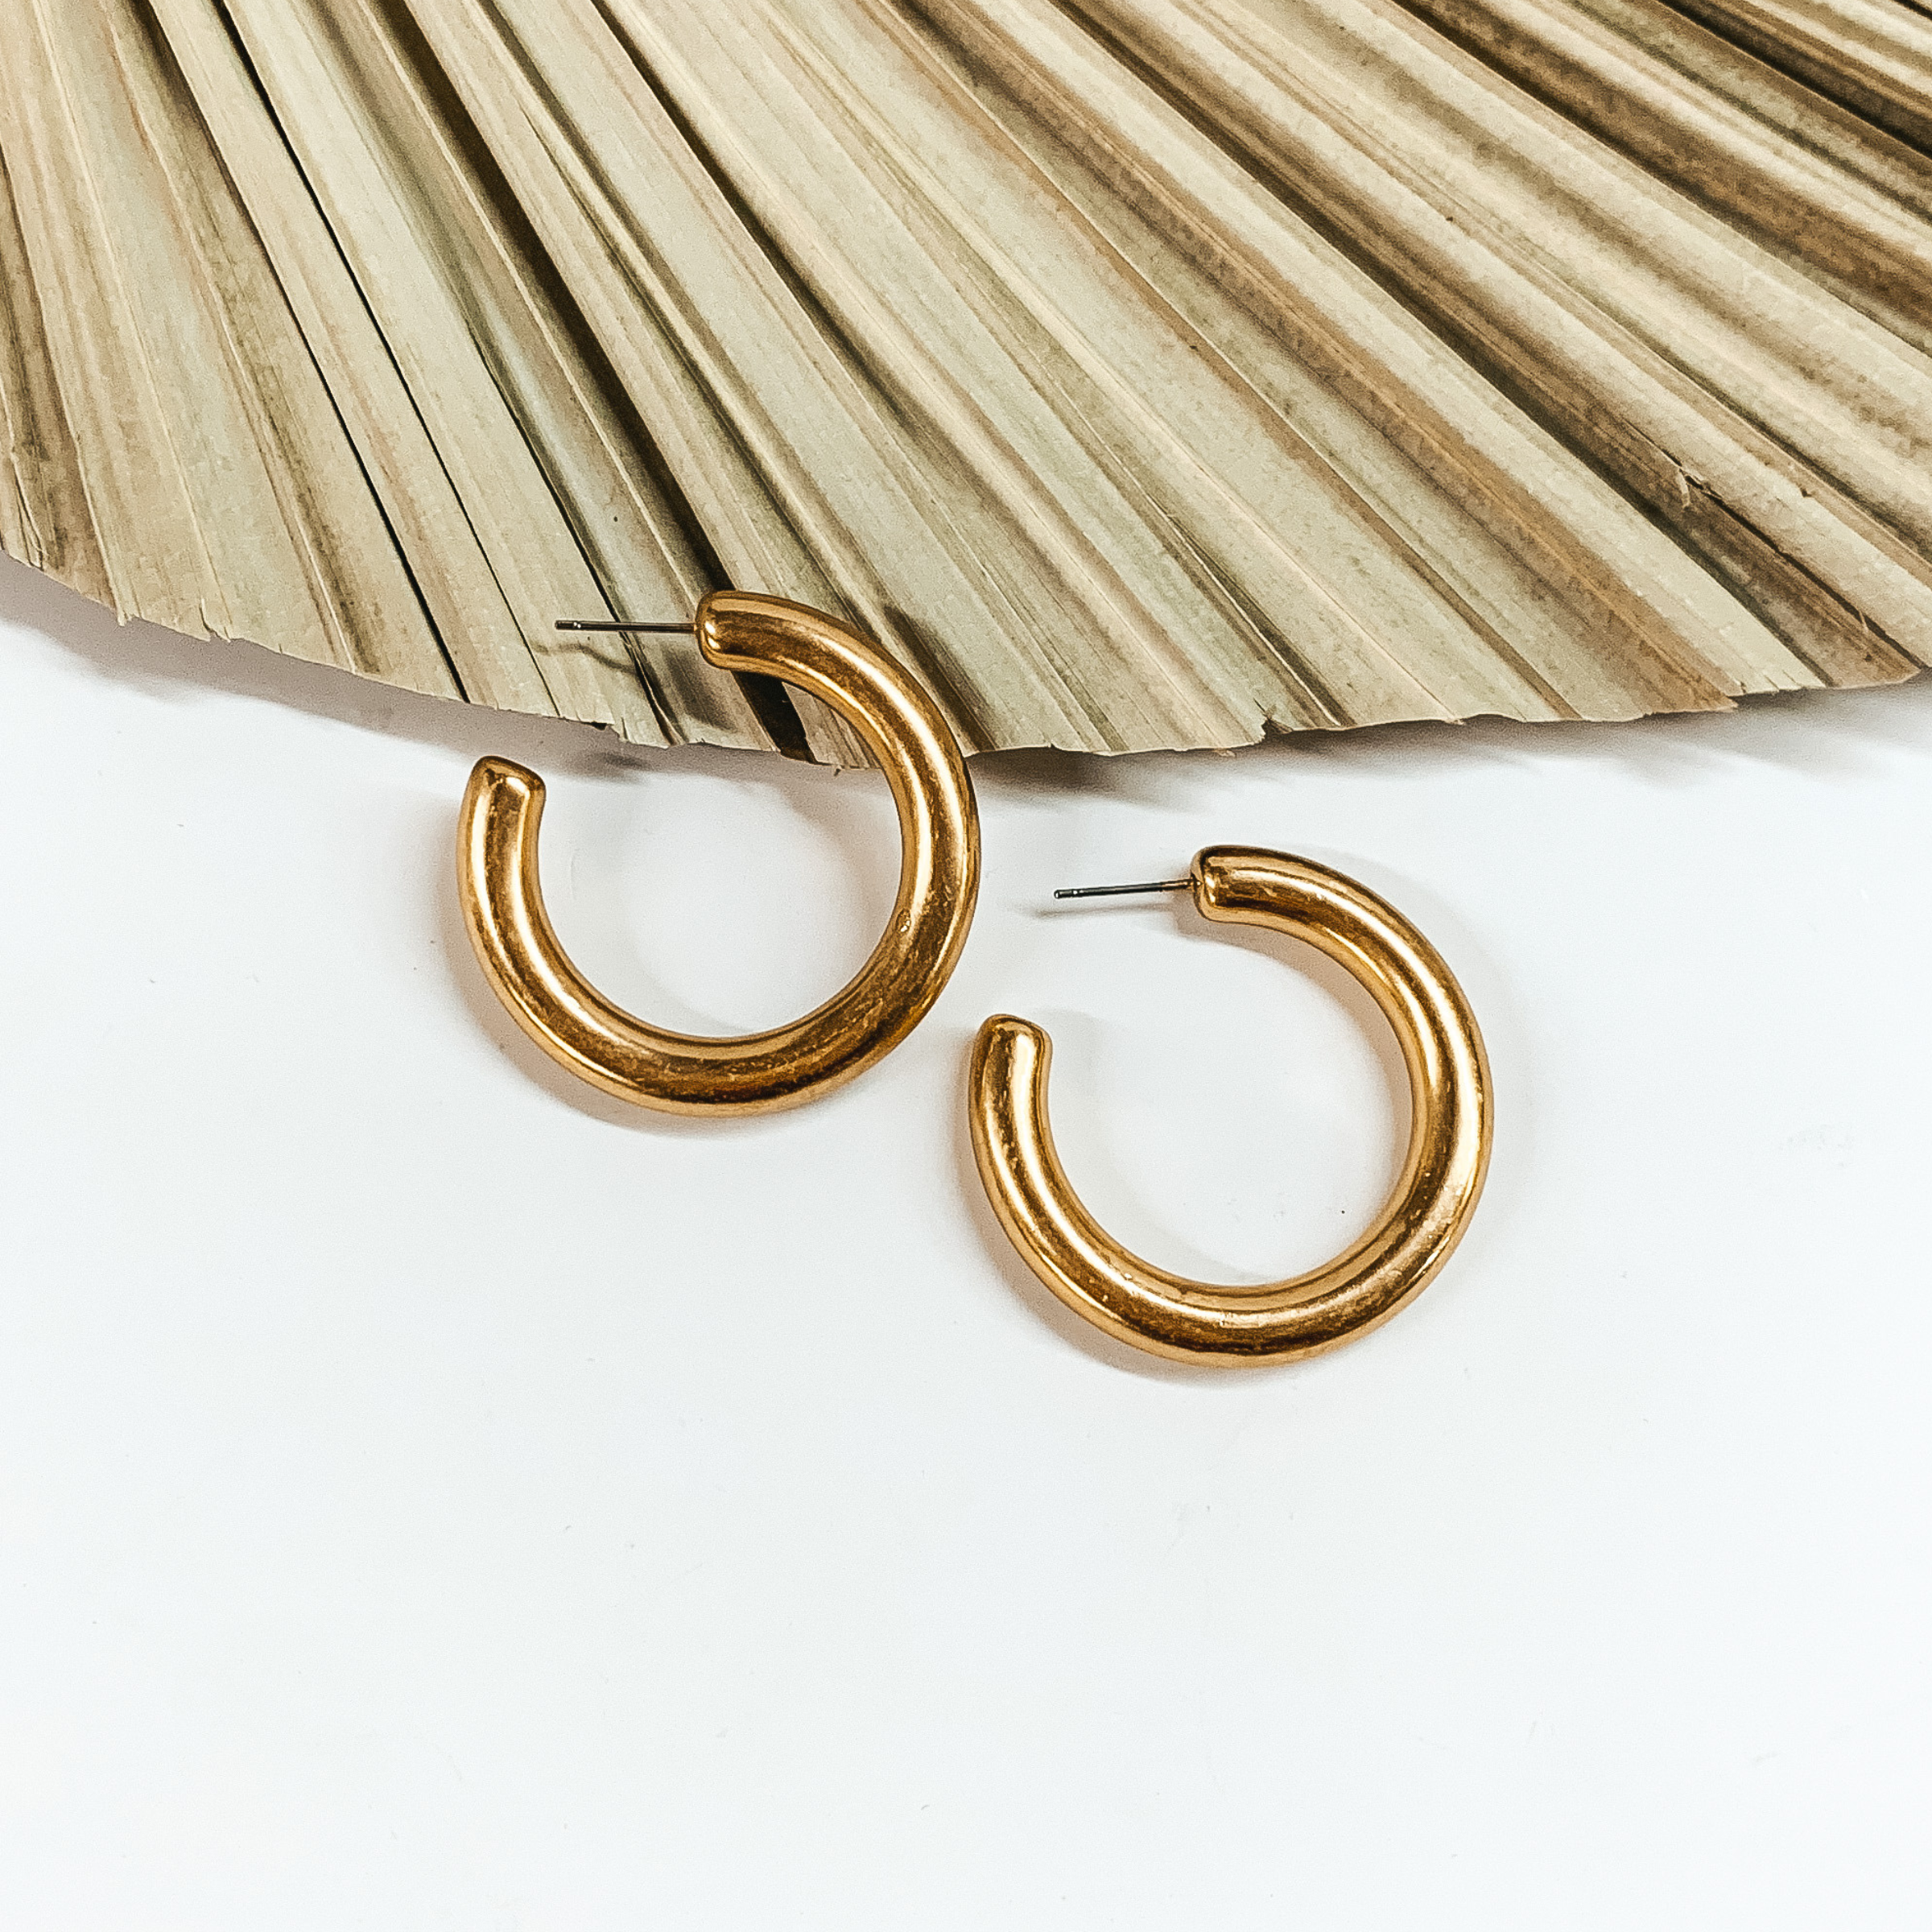 Clean Slate Medium Hoop Earrings in Worn Gold Tone - Giddy Up Glamour Boutique